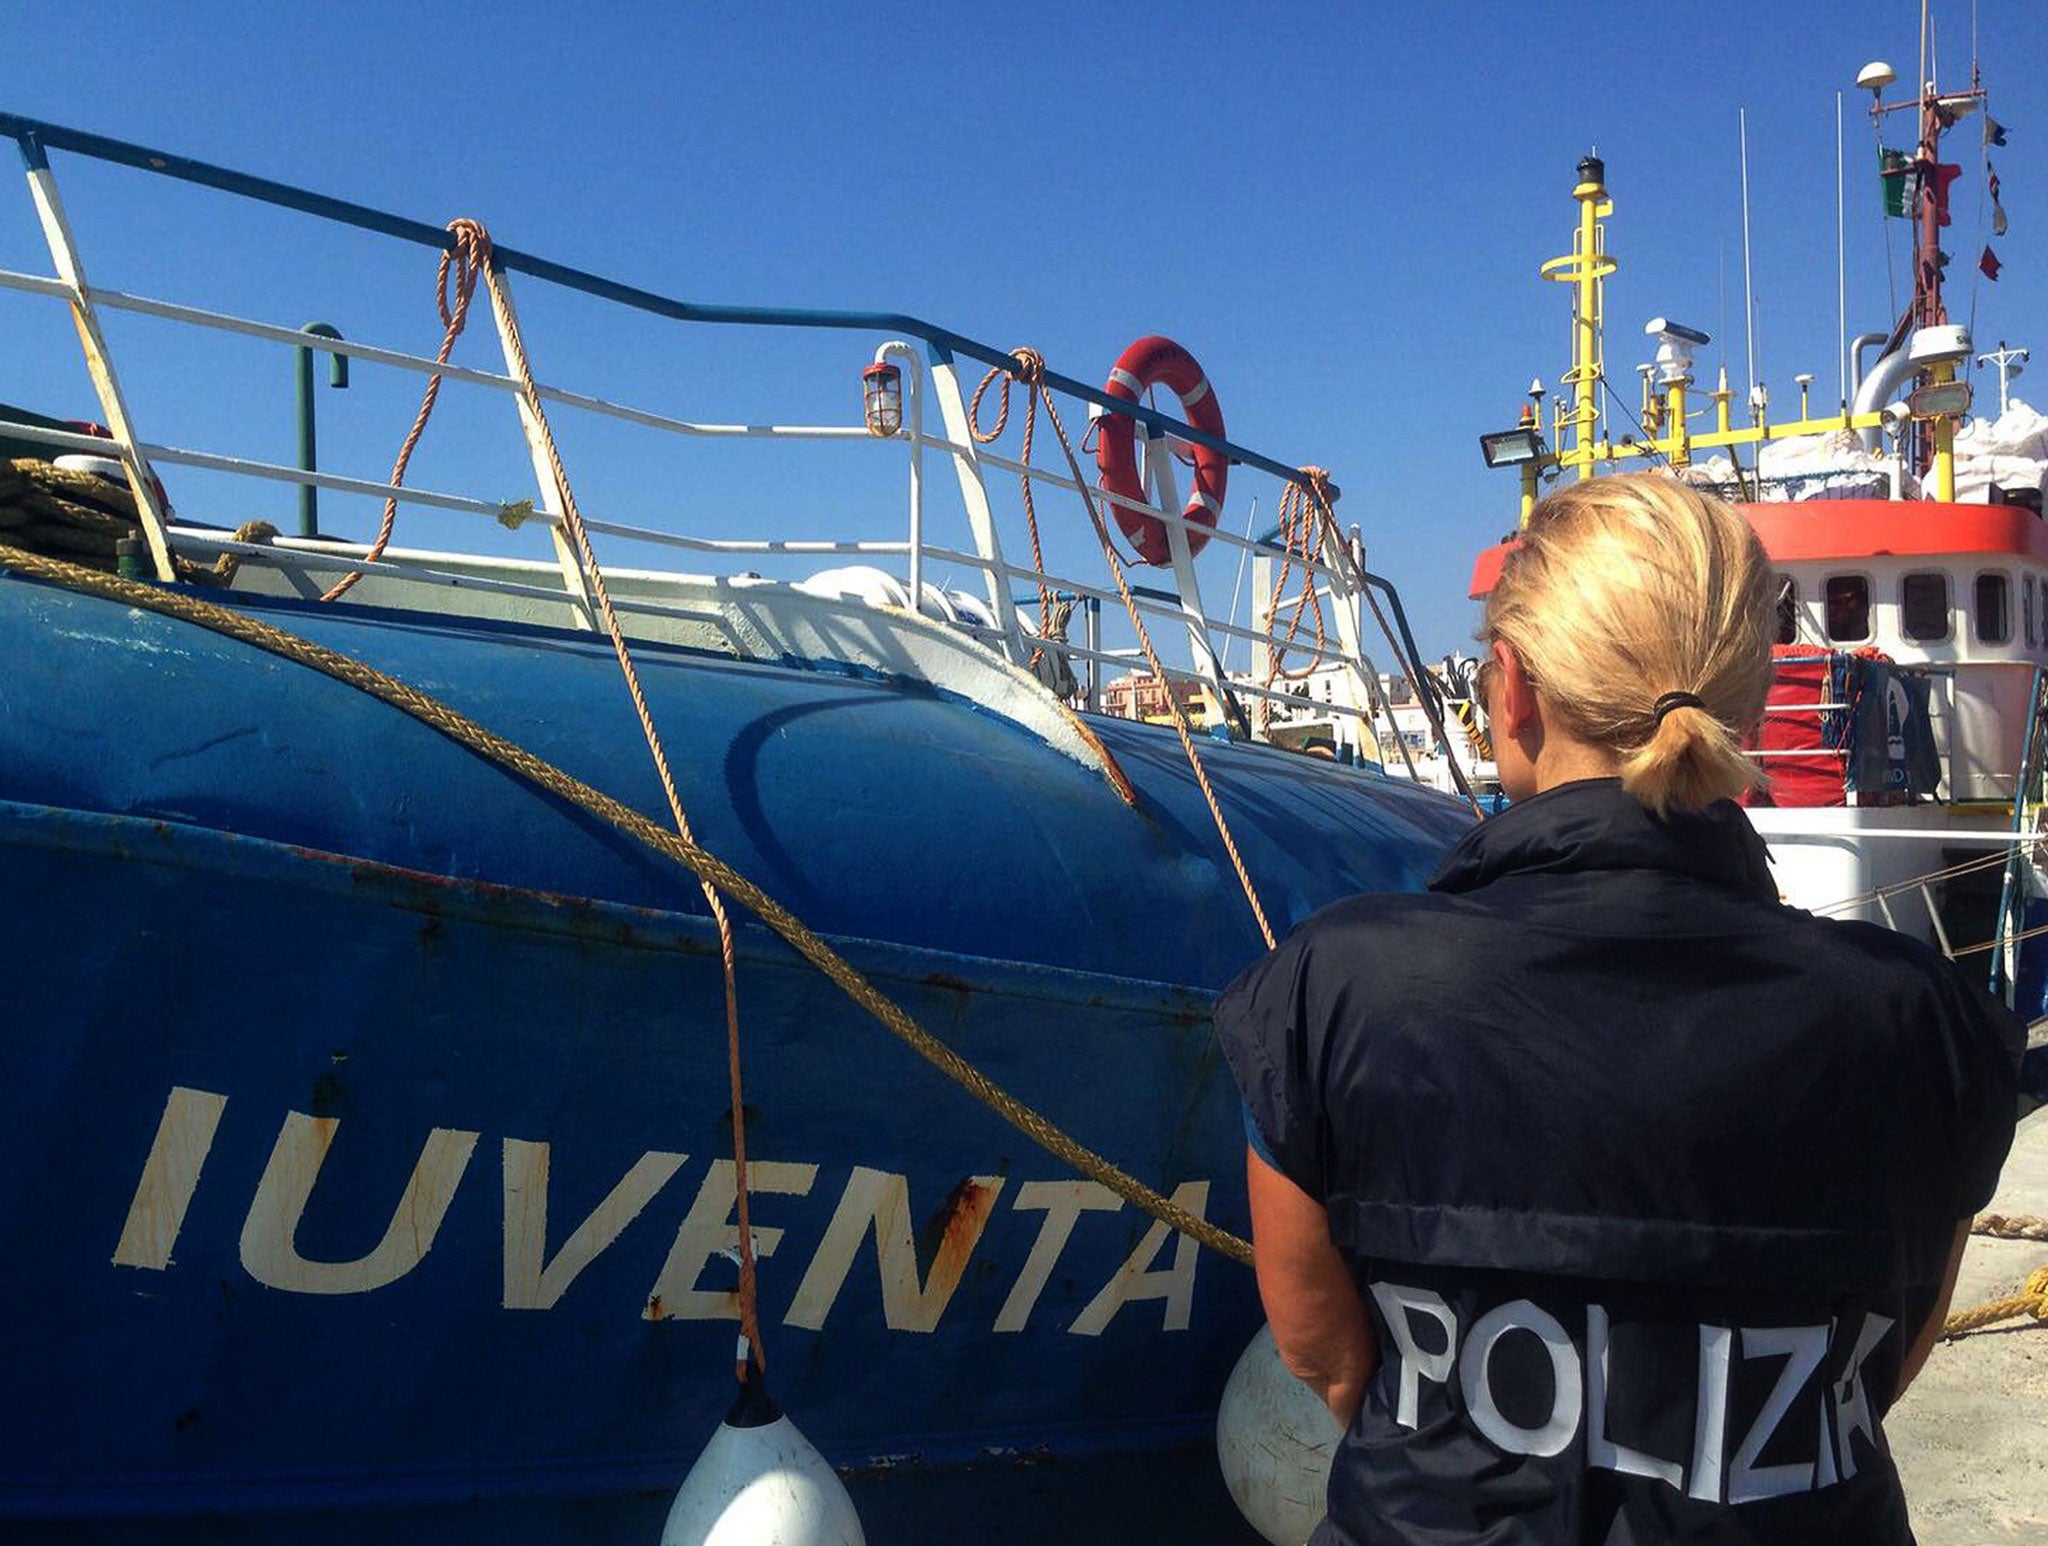 Prosecutors in Trapani said they uncovered evidence suggesting that the Iuventa was used ‘to aid and abet illegal immigration’